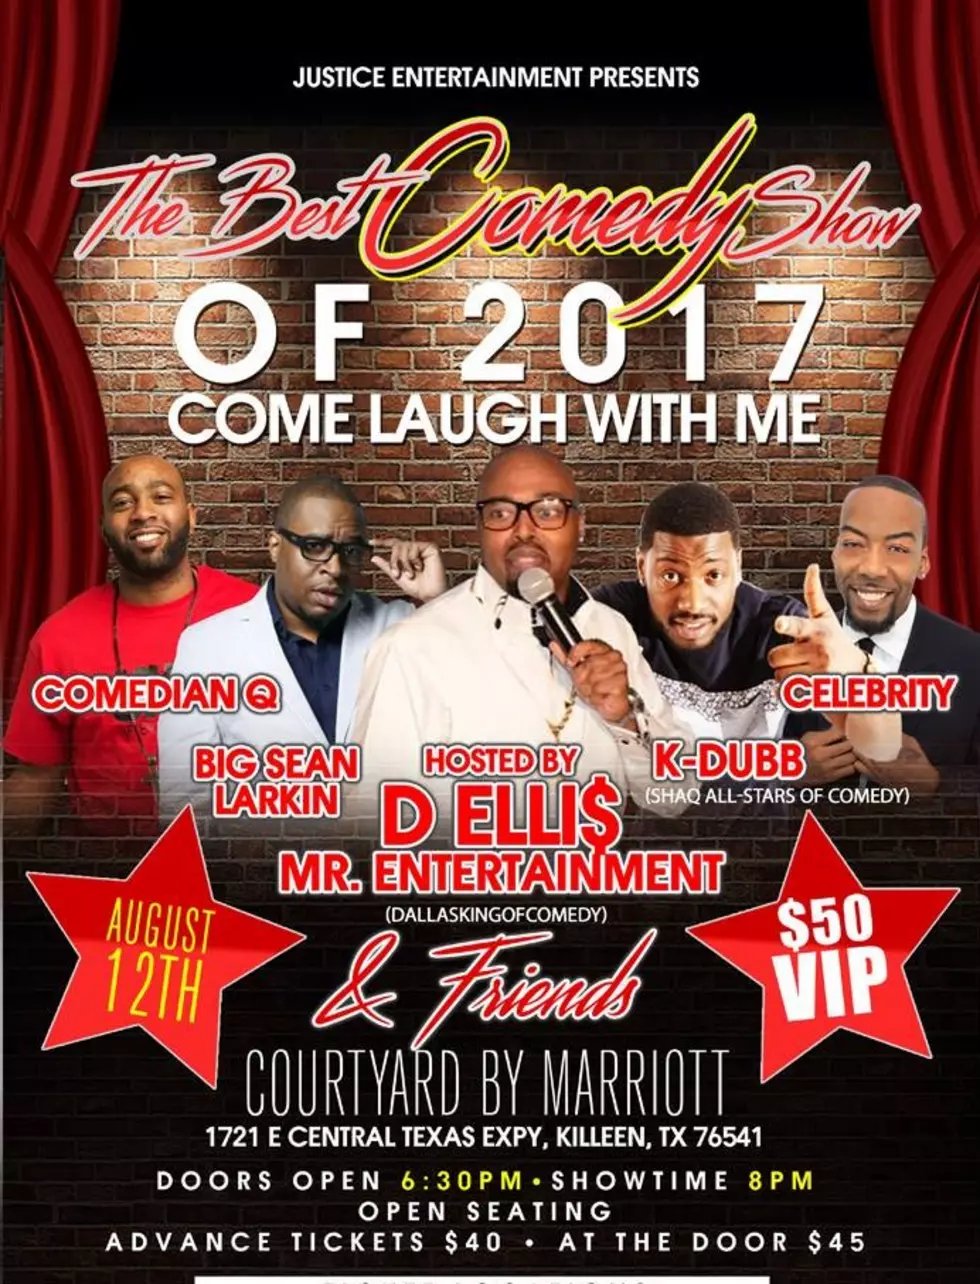 "Come Laugh At Me" August 12th 